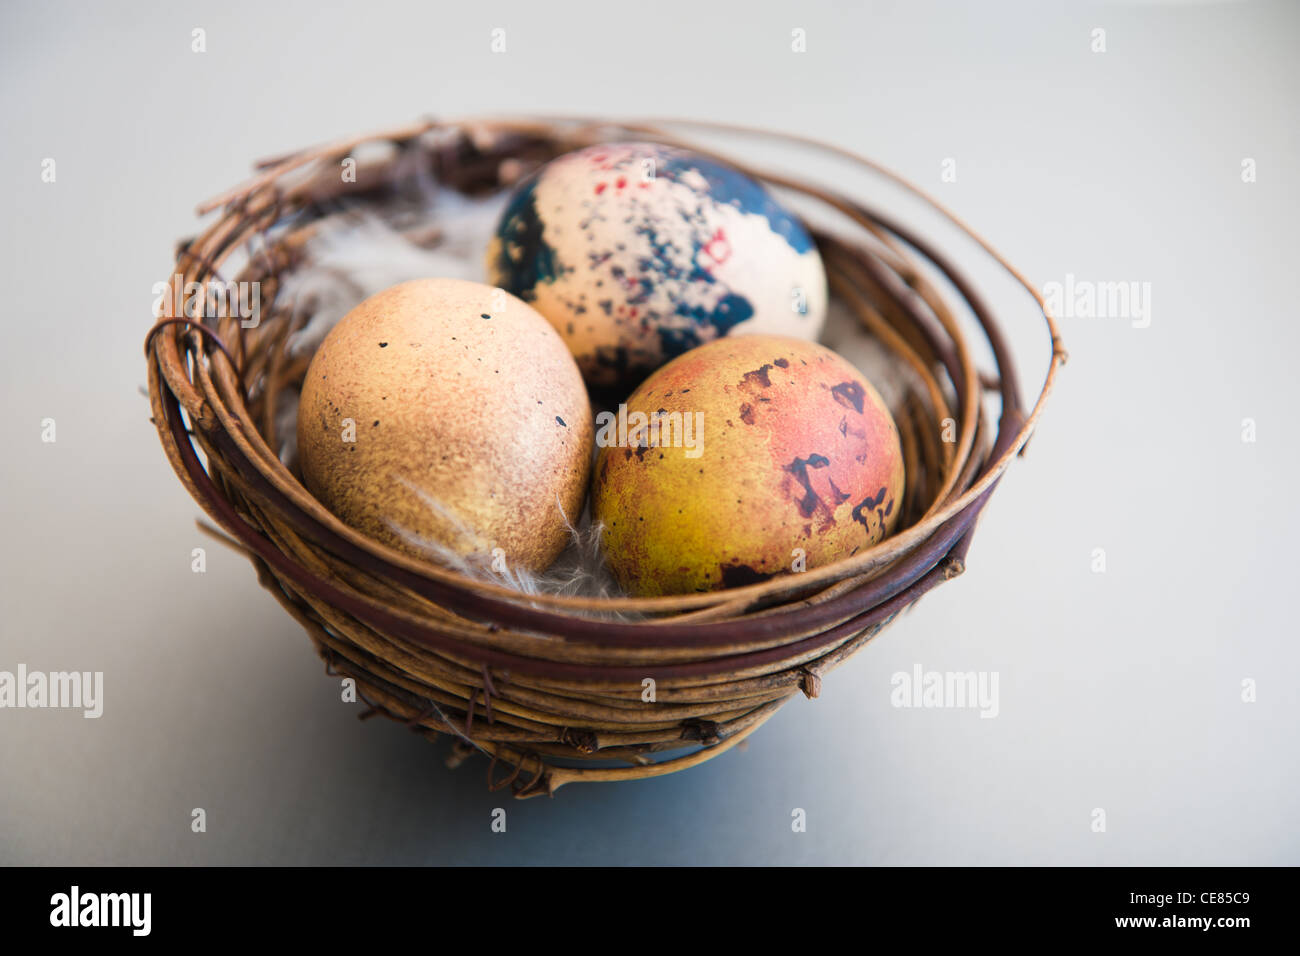 Close up of ornate quails eggs in a basket Stock Photo